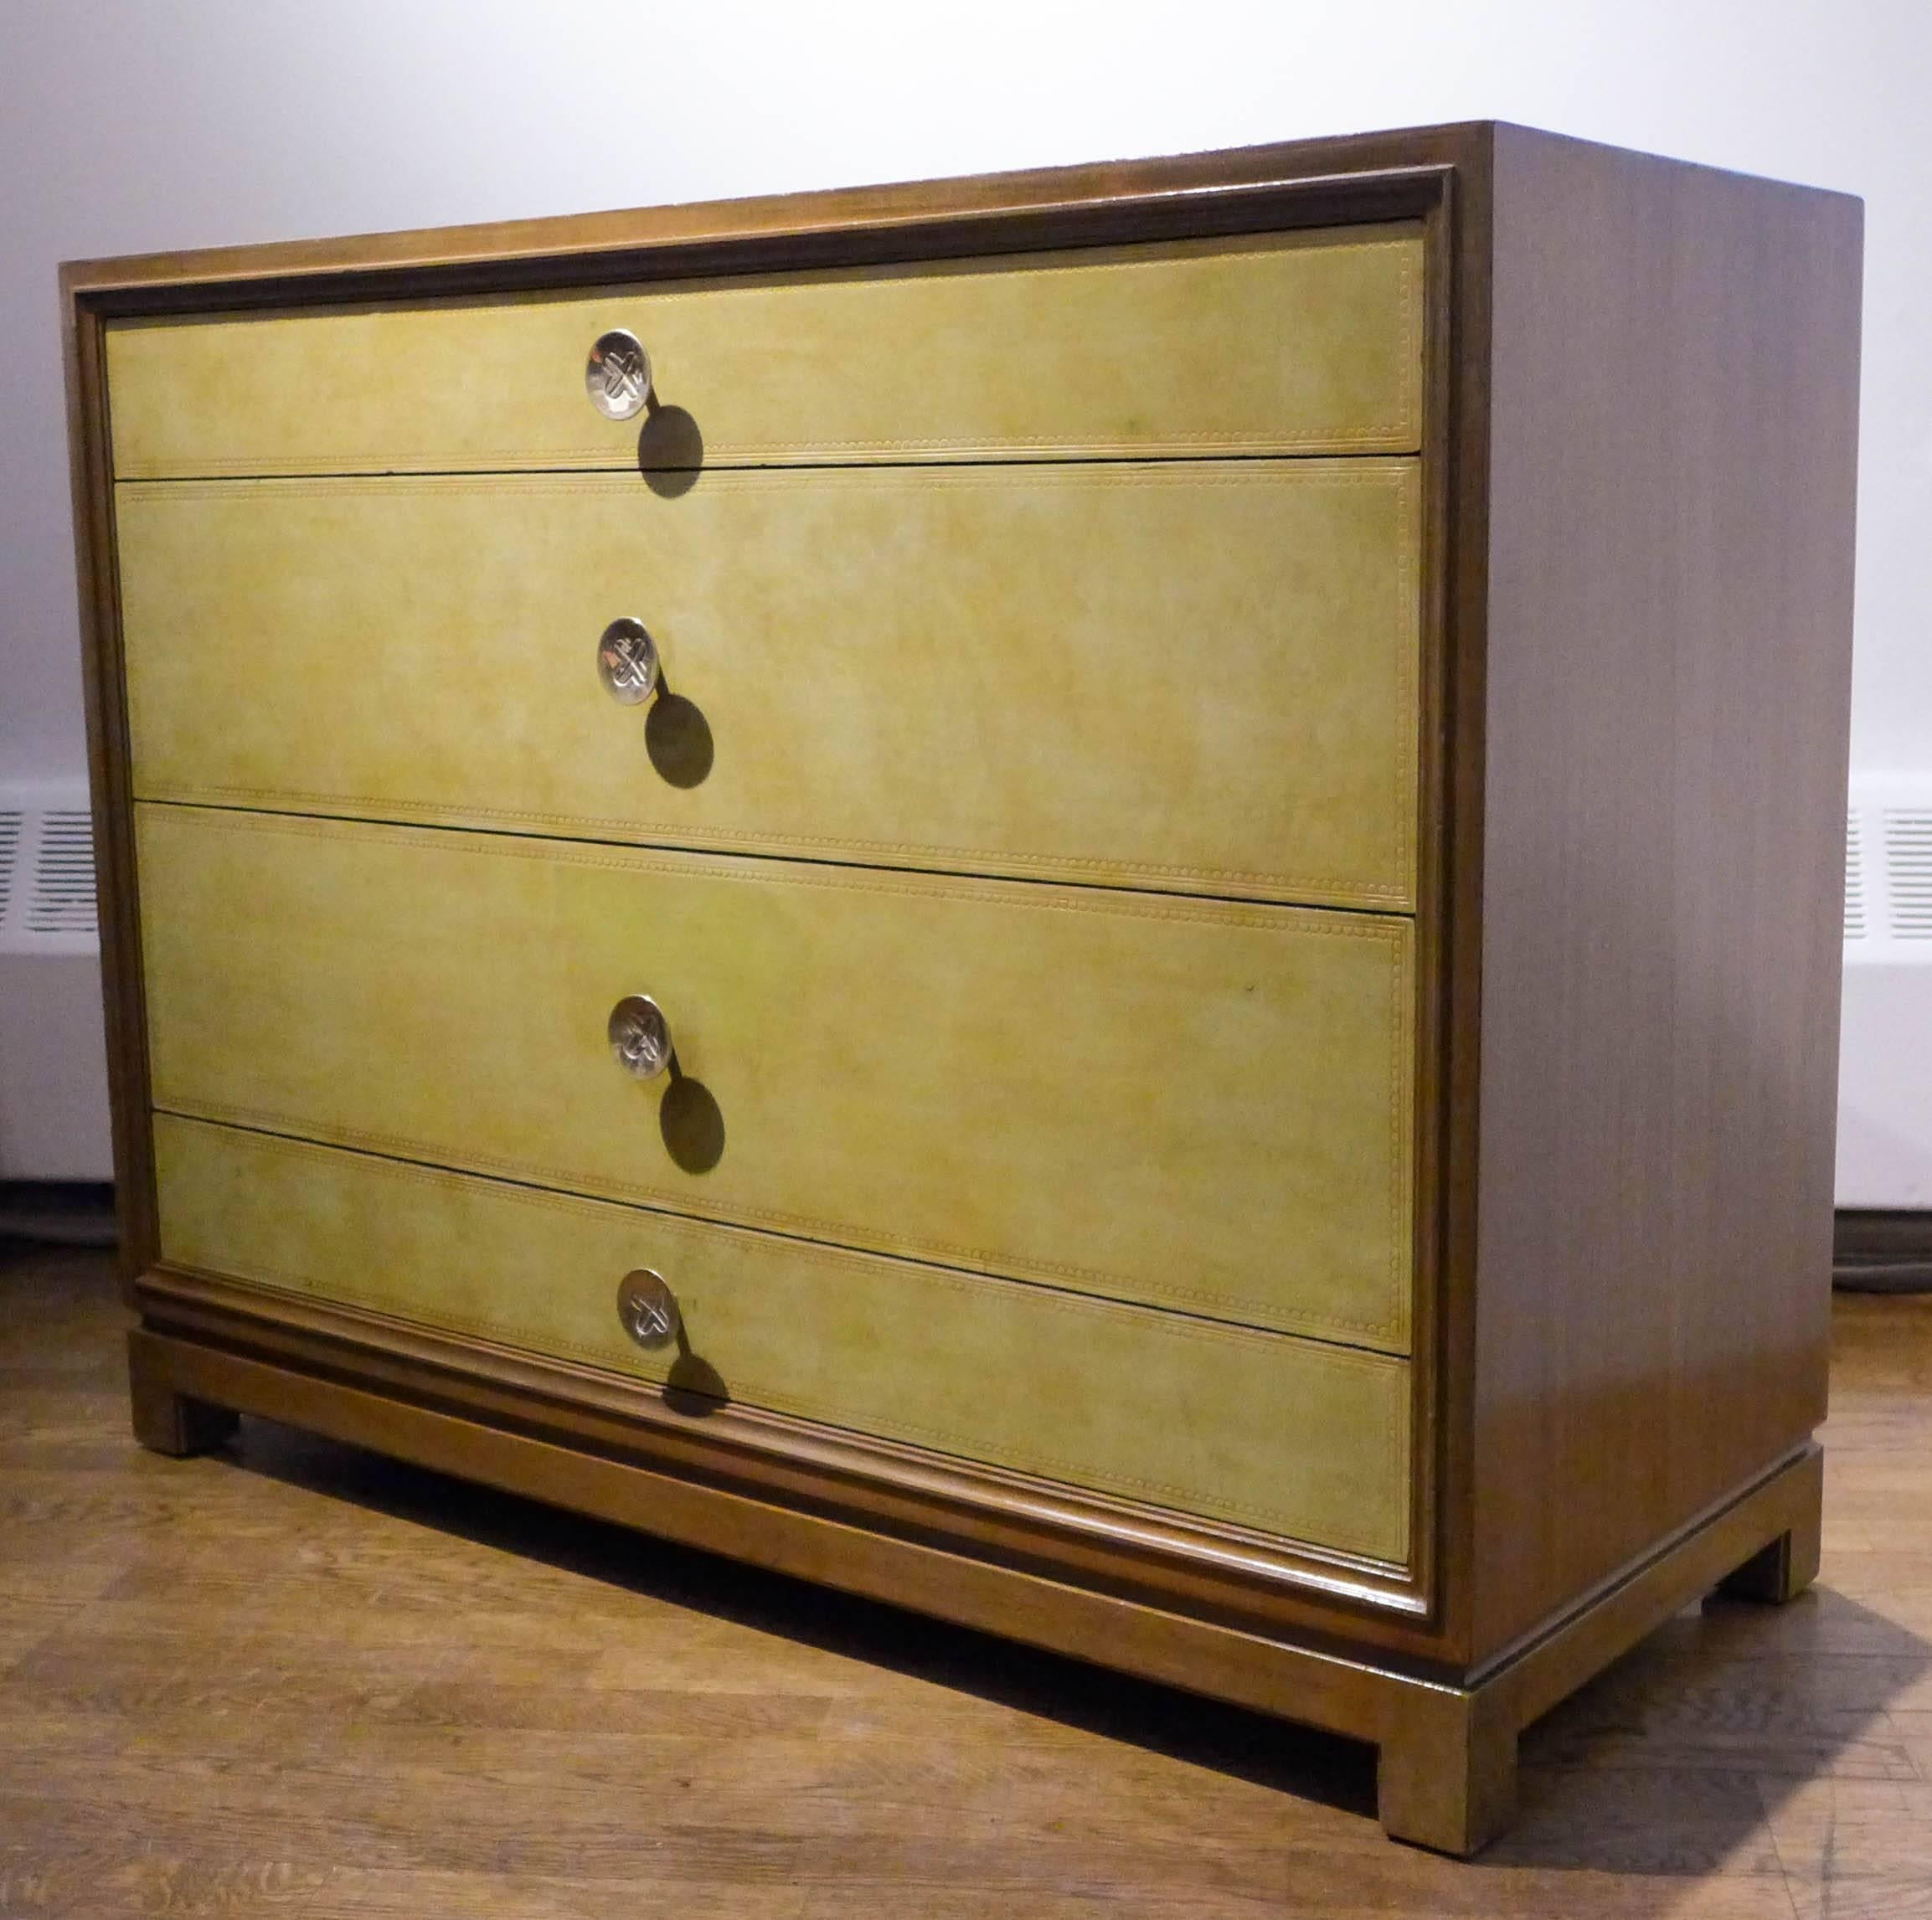 Luxe chest of drawers with bleached mahogany frame, brass pulls, and tooled leather fronts. Designed by Tommi Parzinger for Charak Modern, produced, circa 1940s. The leather is in original condition, the mahogany case has been lightly refurbished.